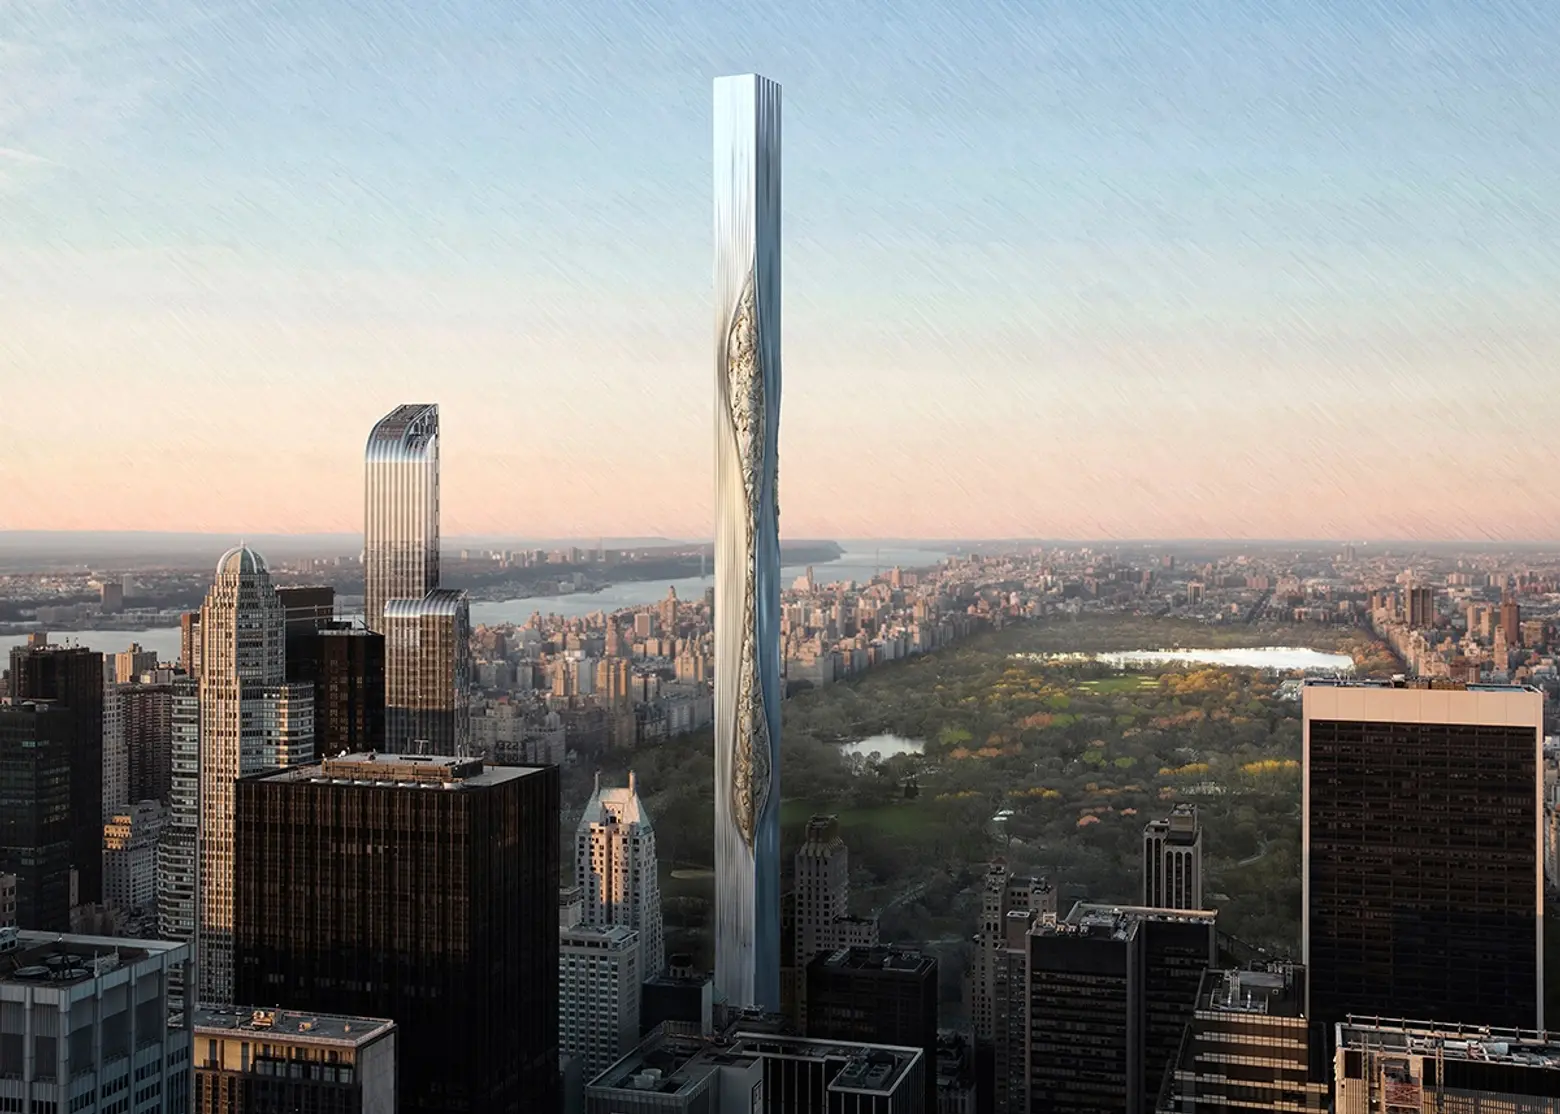 Skyscraper proposal drapes Billionaires’ Row tower with flexible materials